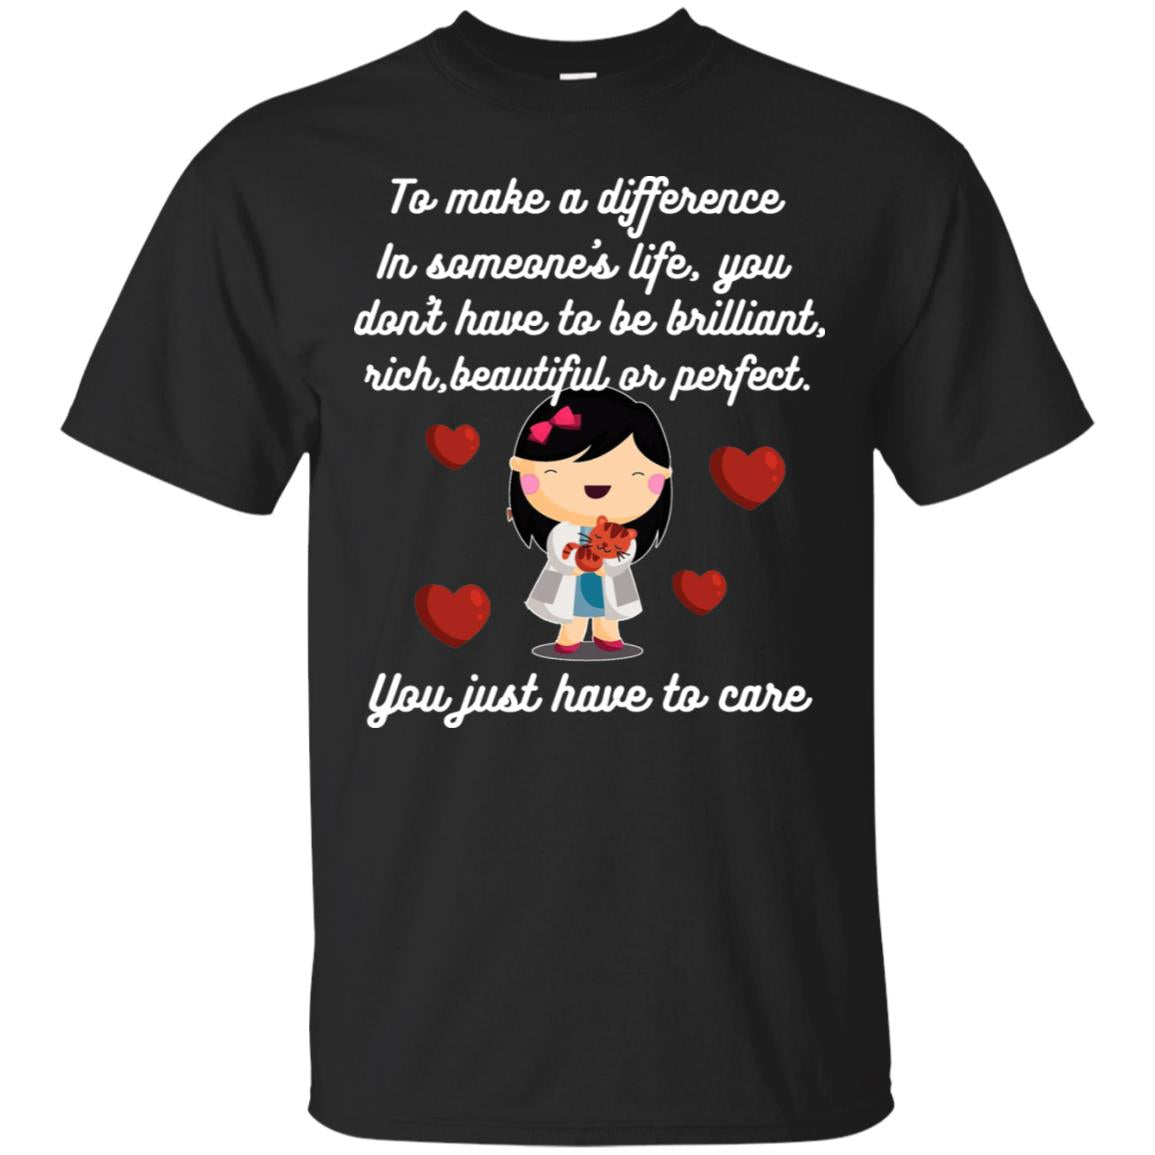 To Make A Difference In Someone's Life You Don't Have To Be Brilliant, Rich, Beautiful, Or Perfect. You Just Have To CareG200 Gildan Ultra Cotton T-Shirt